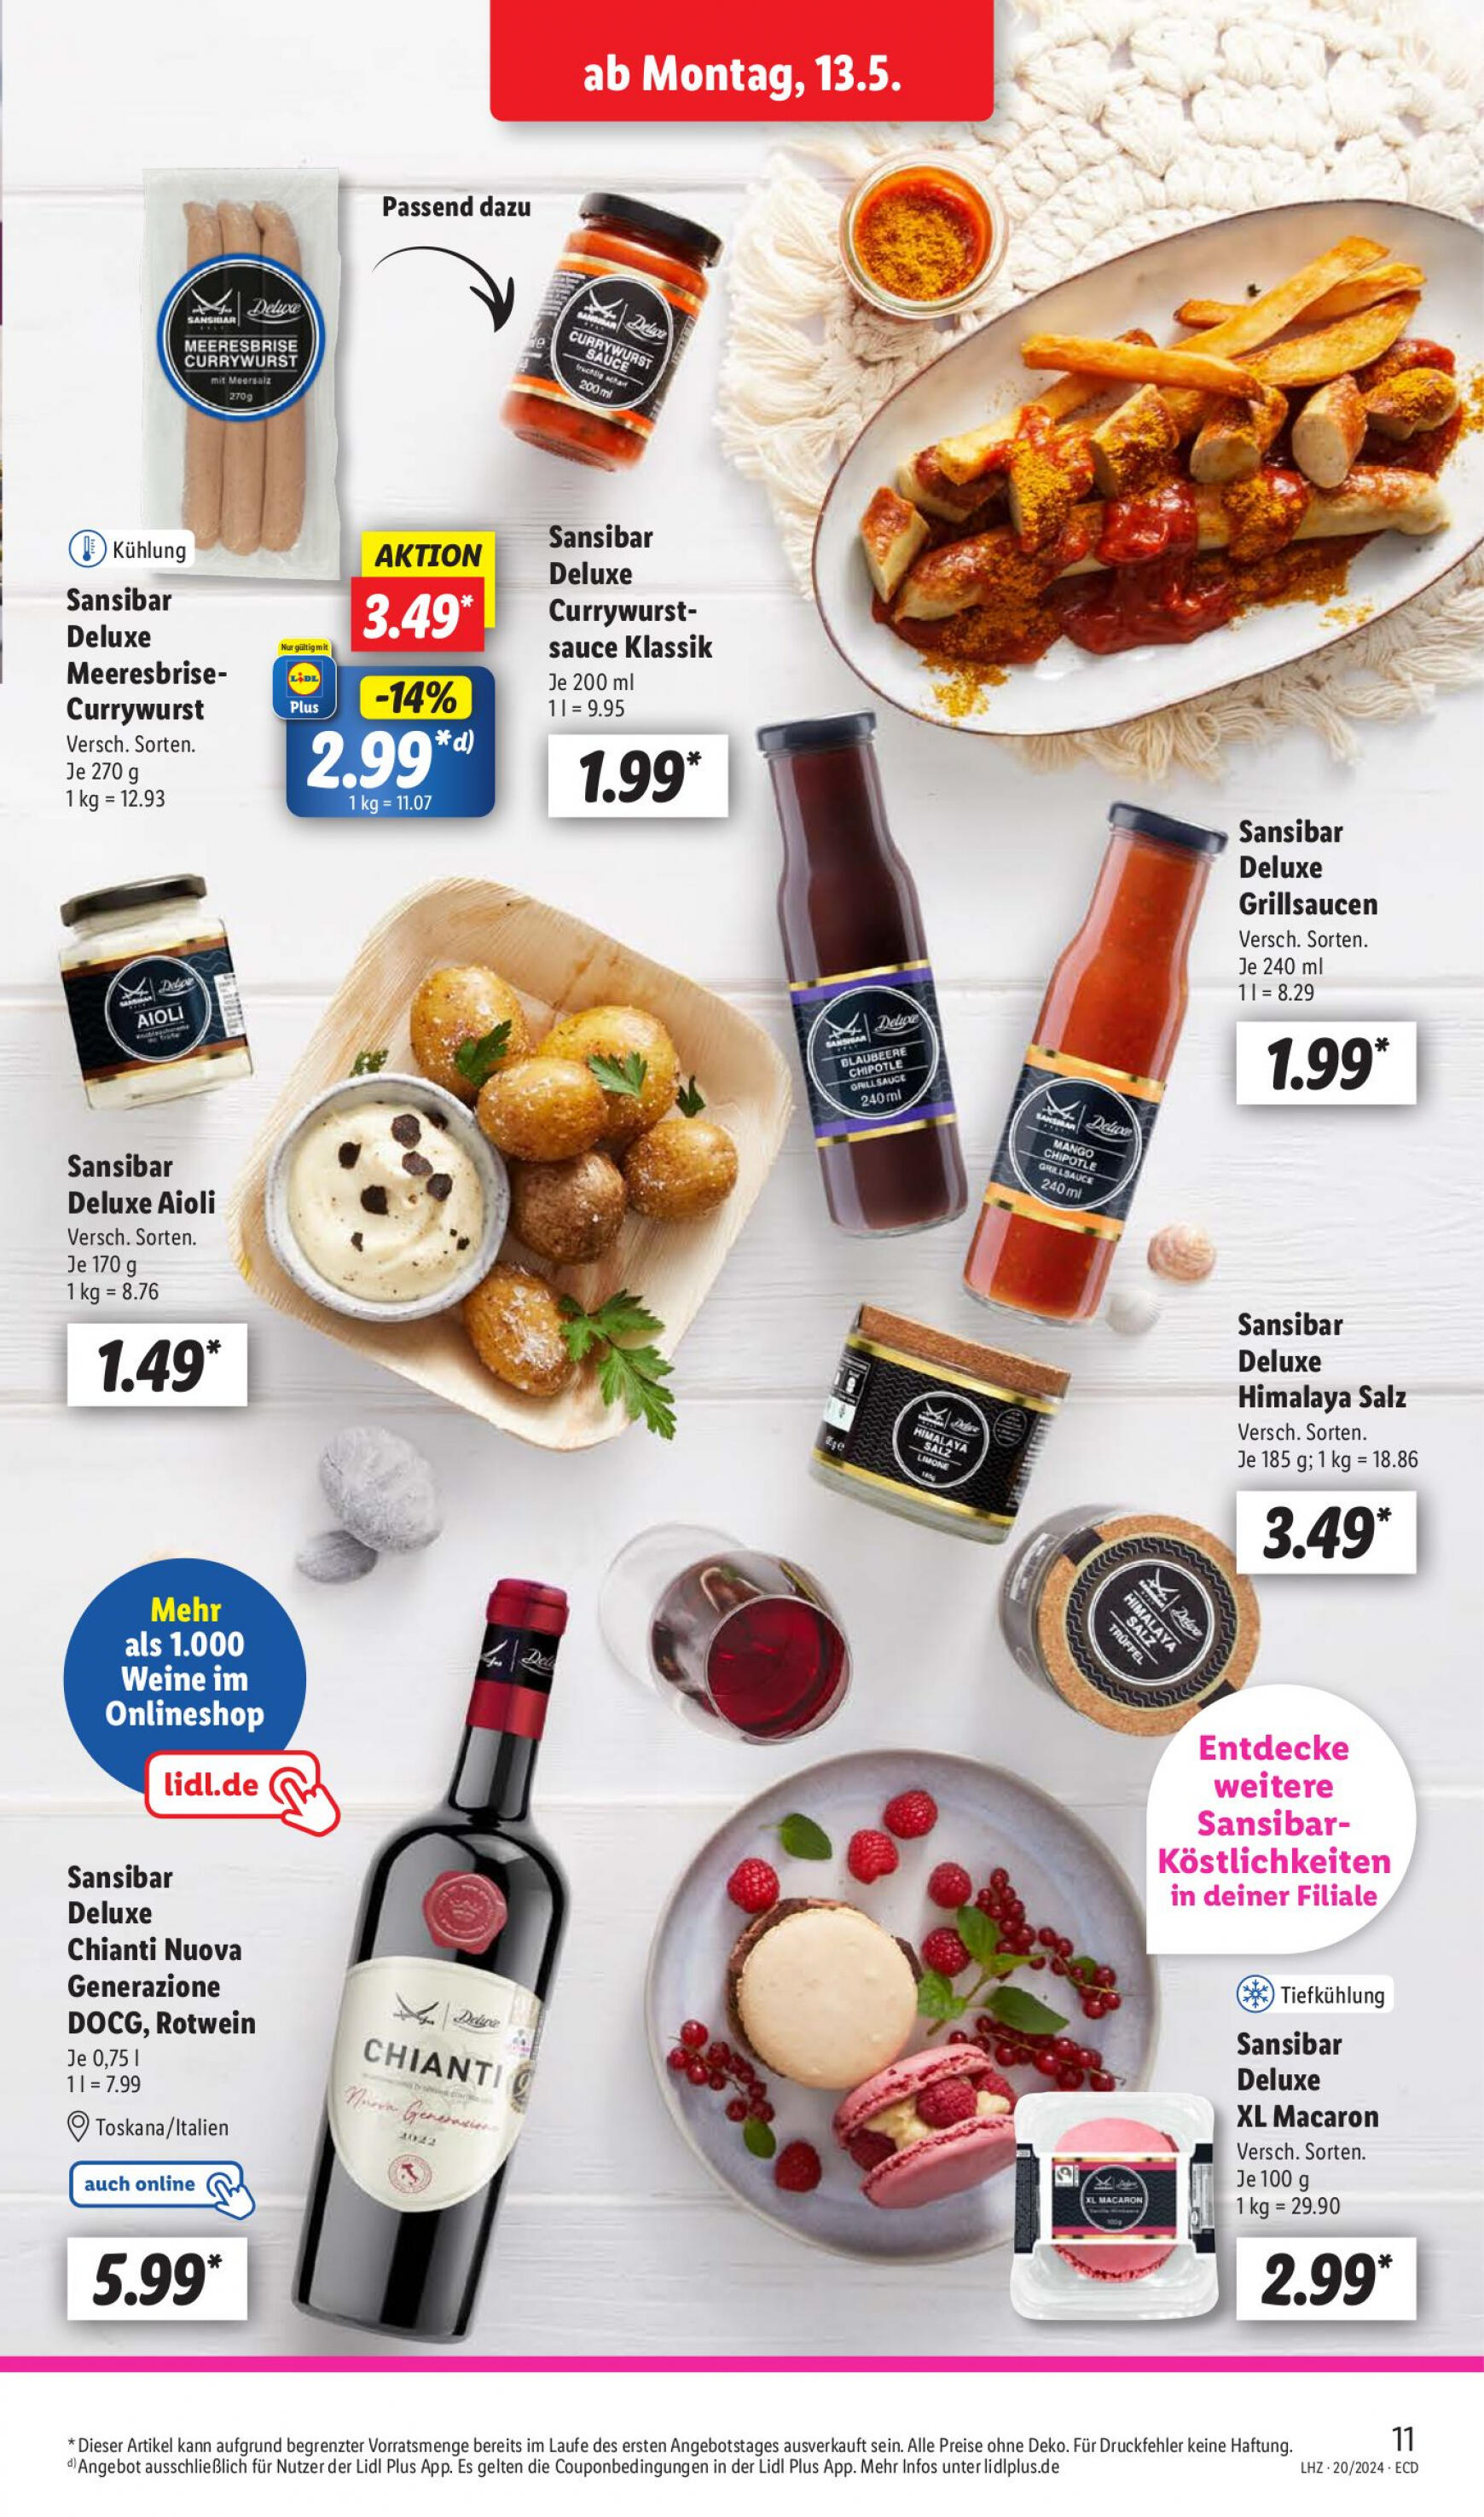 lidl - Flyer Lidl aktuell 13.05. - 18.05. - page: 13